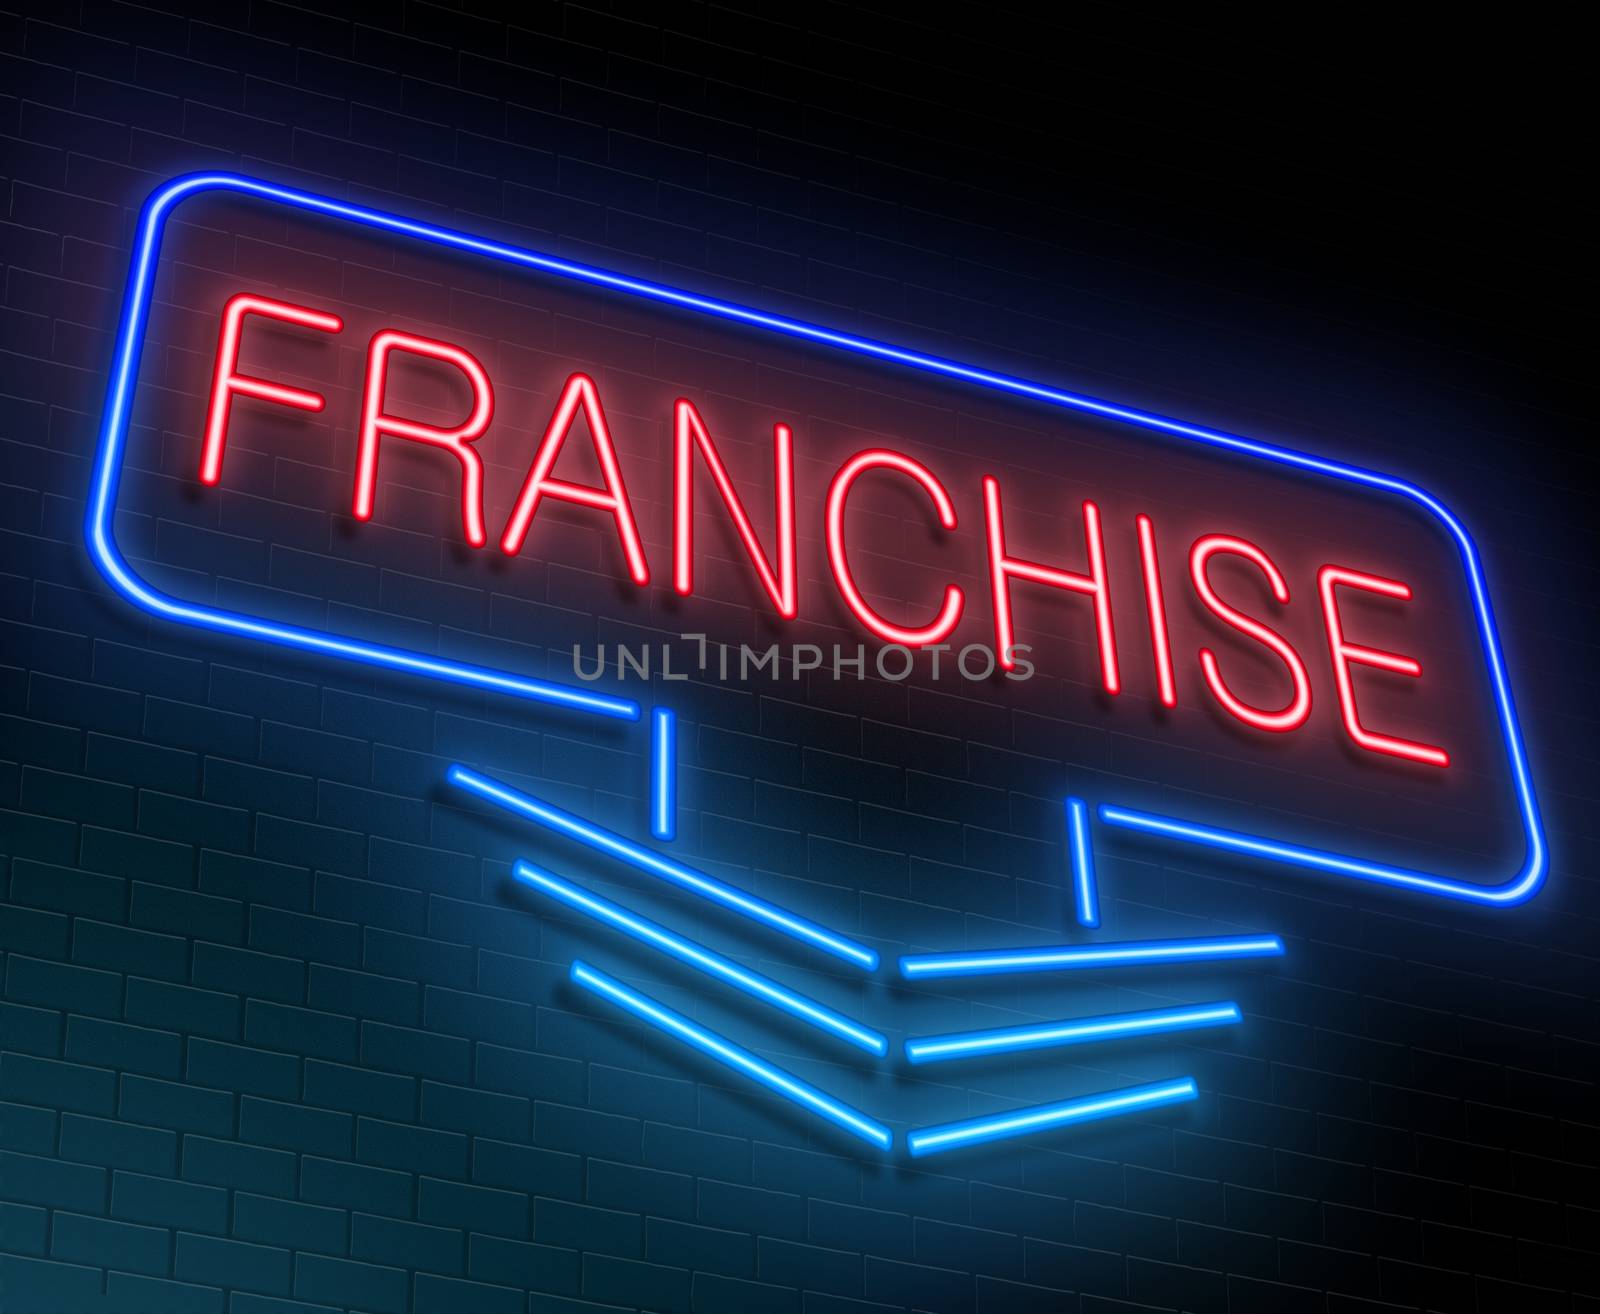 Illustration depicting an illuminated neon sign with a Franchise concept.